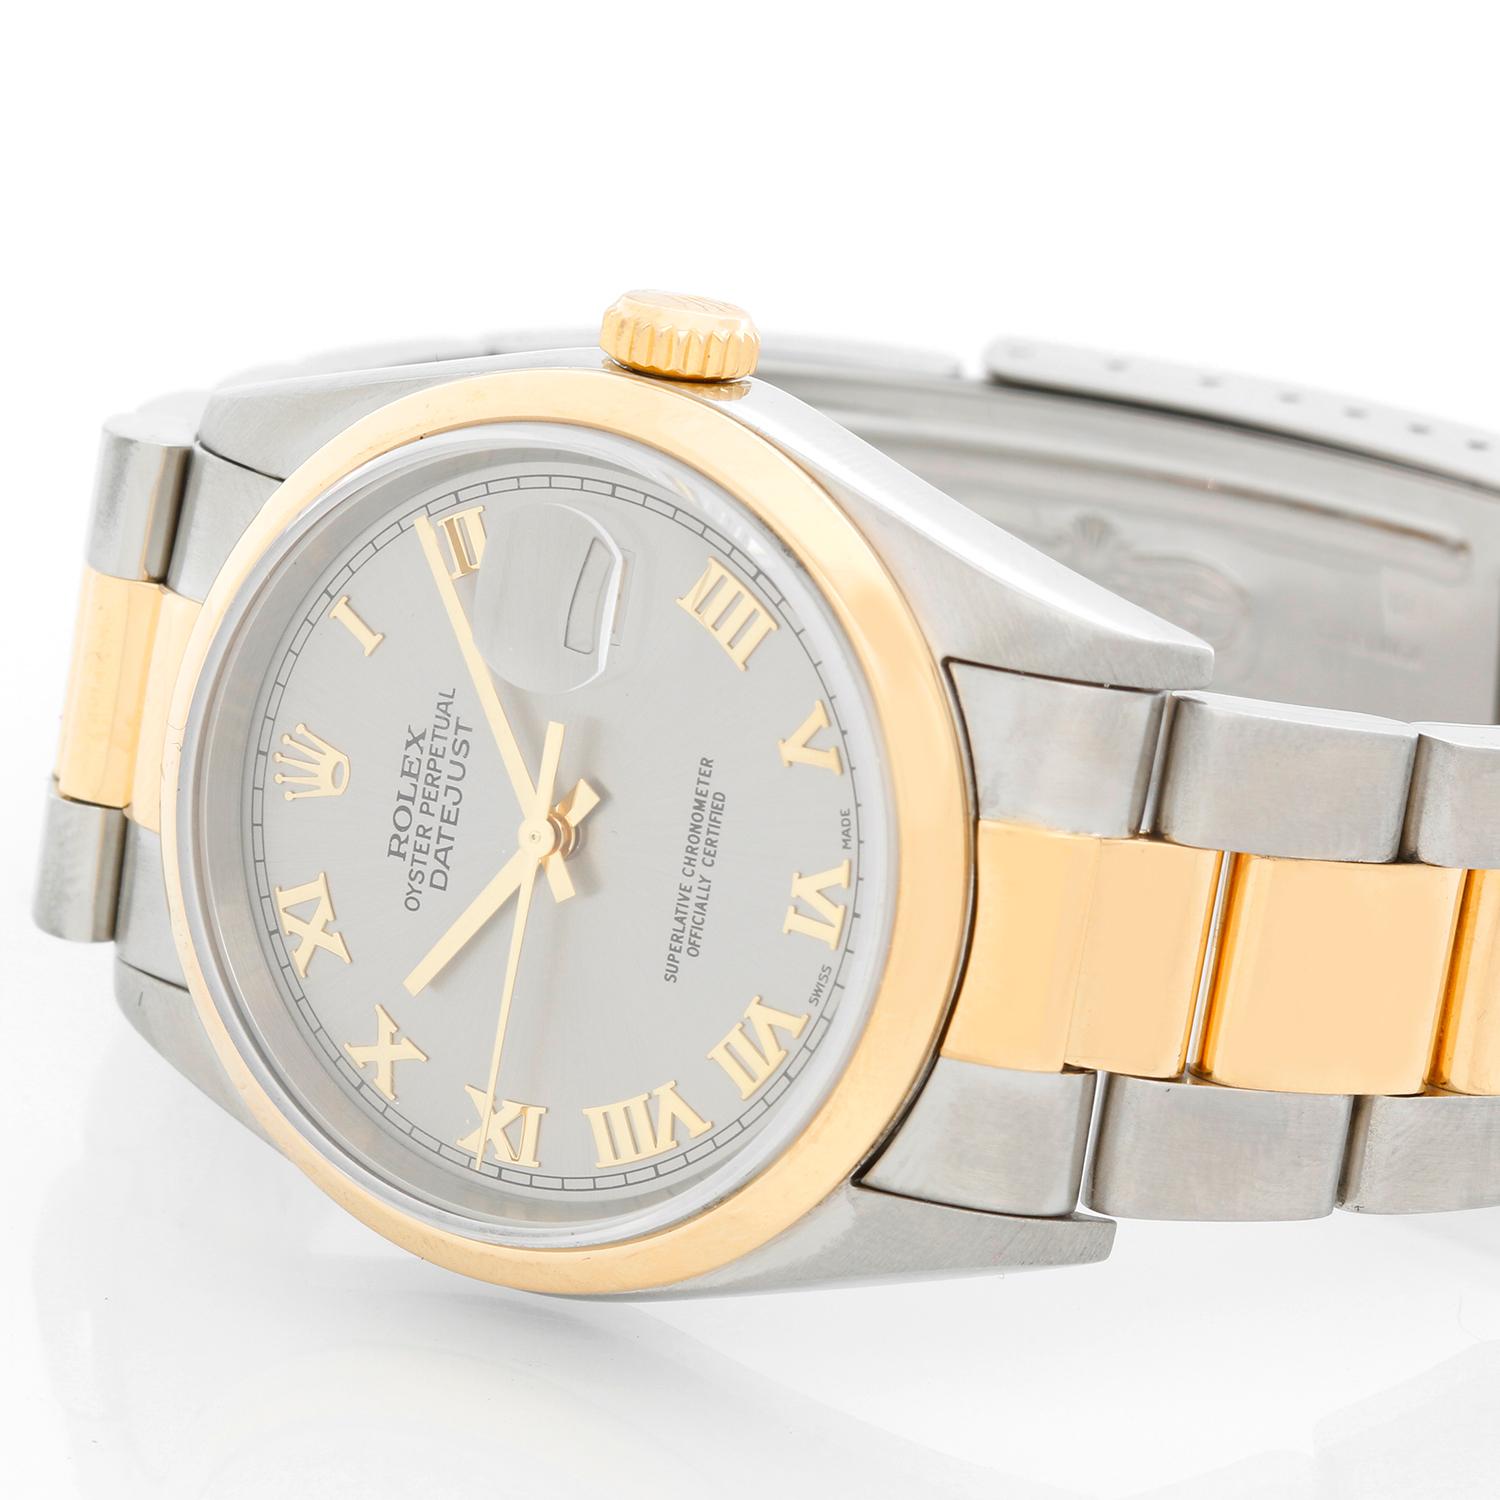 Rolex Datejust Men's Steel & Gold 2-Tone Watch Oyster Bracelet 16203 - Automatic winding, 31 jewels, Quickset, sapphire crystal. Stainless steel case with 18k yellow gold smooth bezel (36mm diameter). Rhodium Roman dial. Stainless steel and 18k